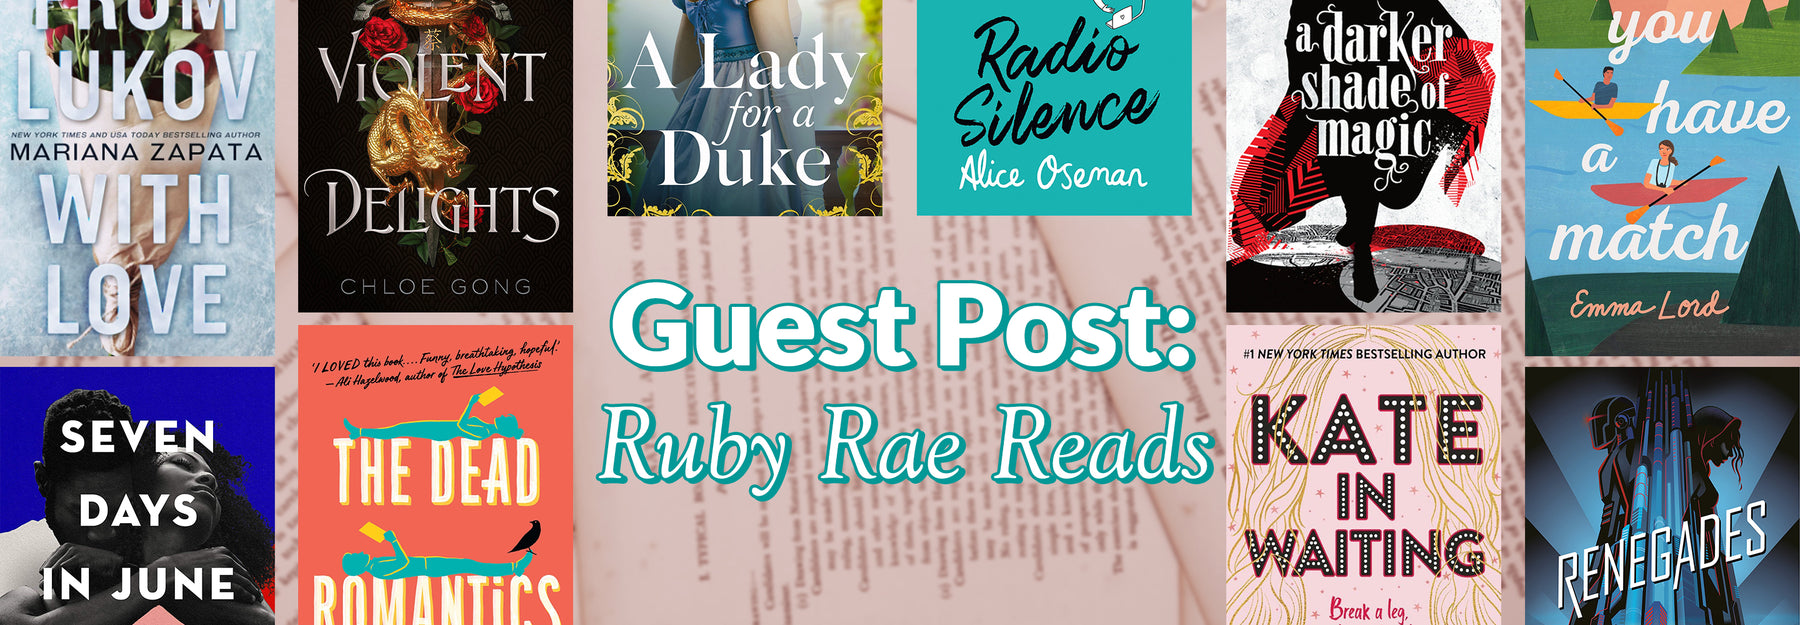 Underrated Books to Read in 2023 - Guest Post by Ruby Rae Reads